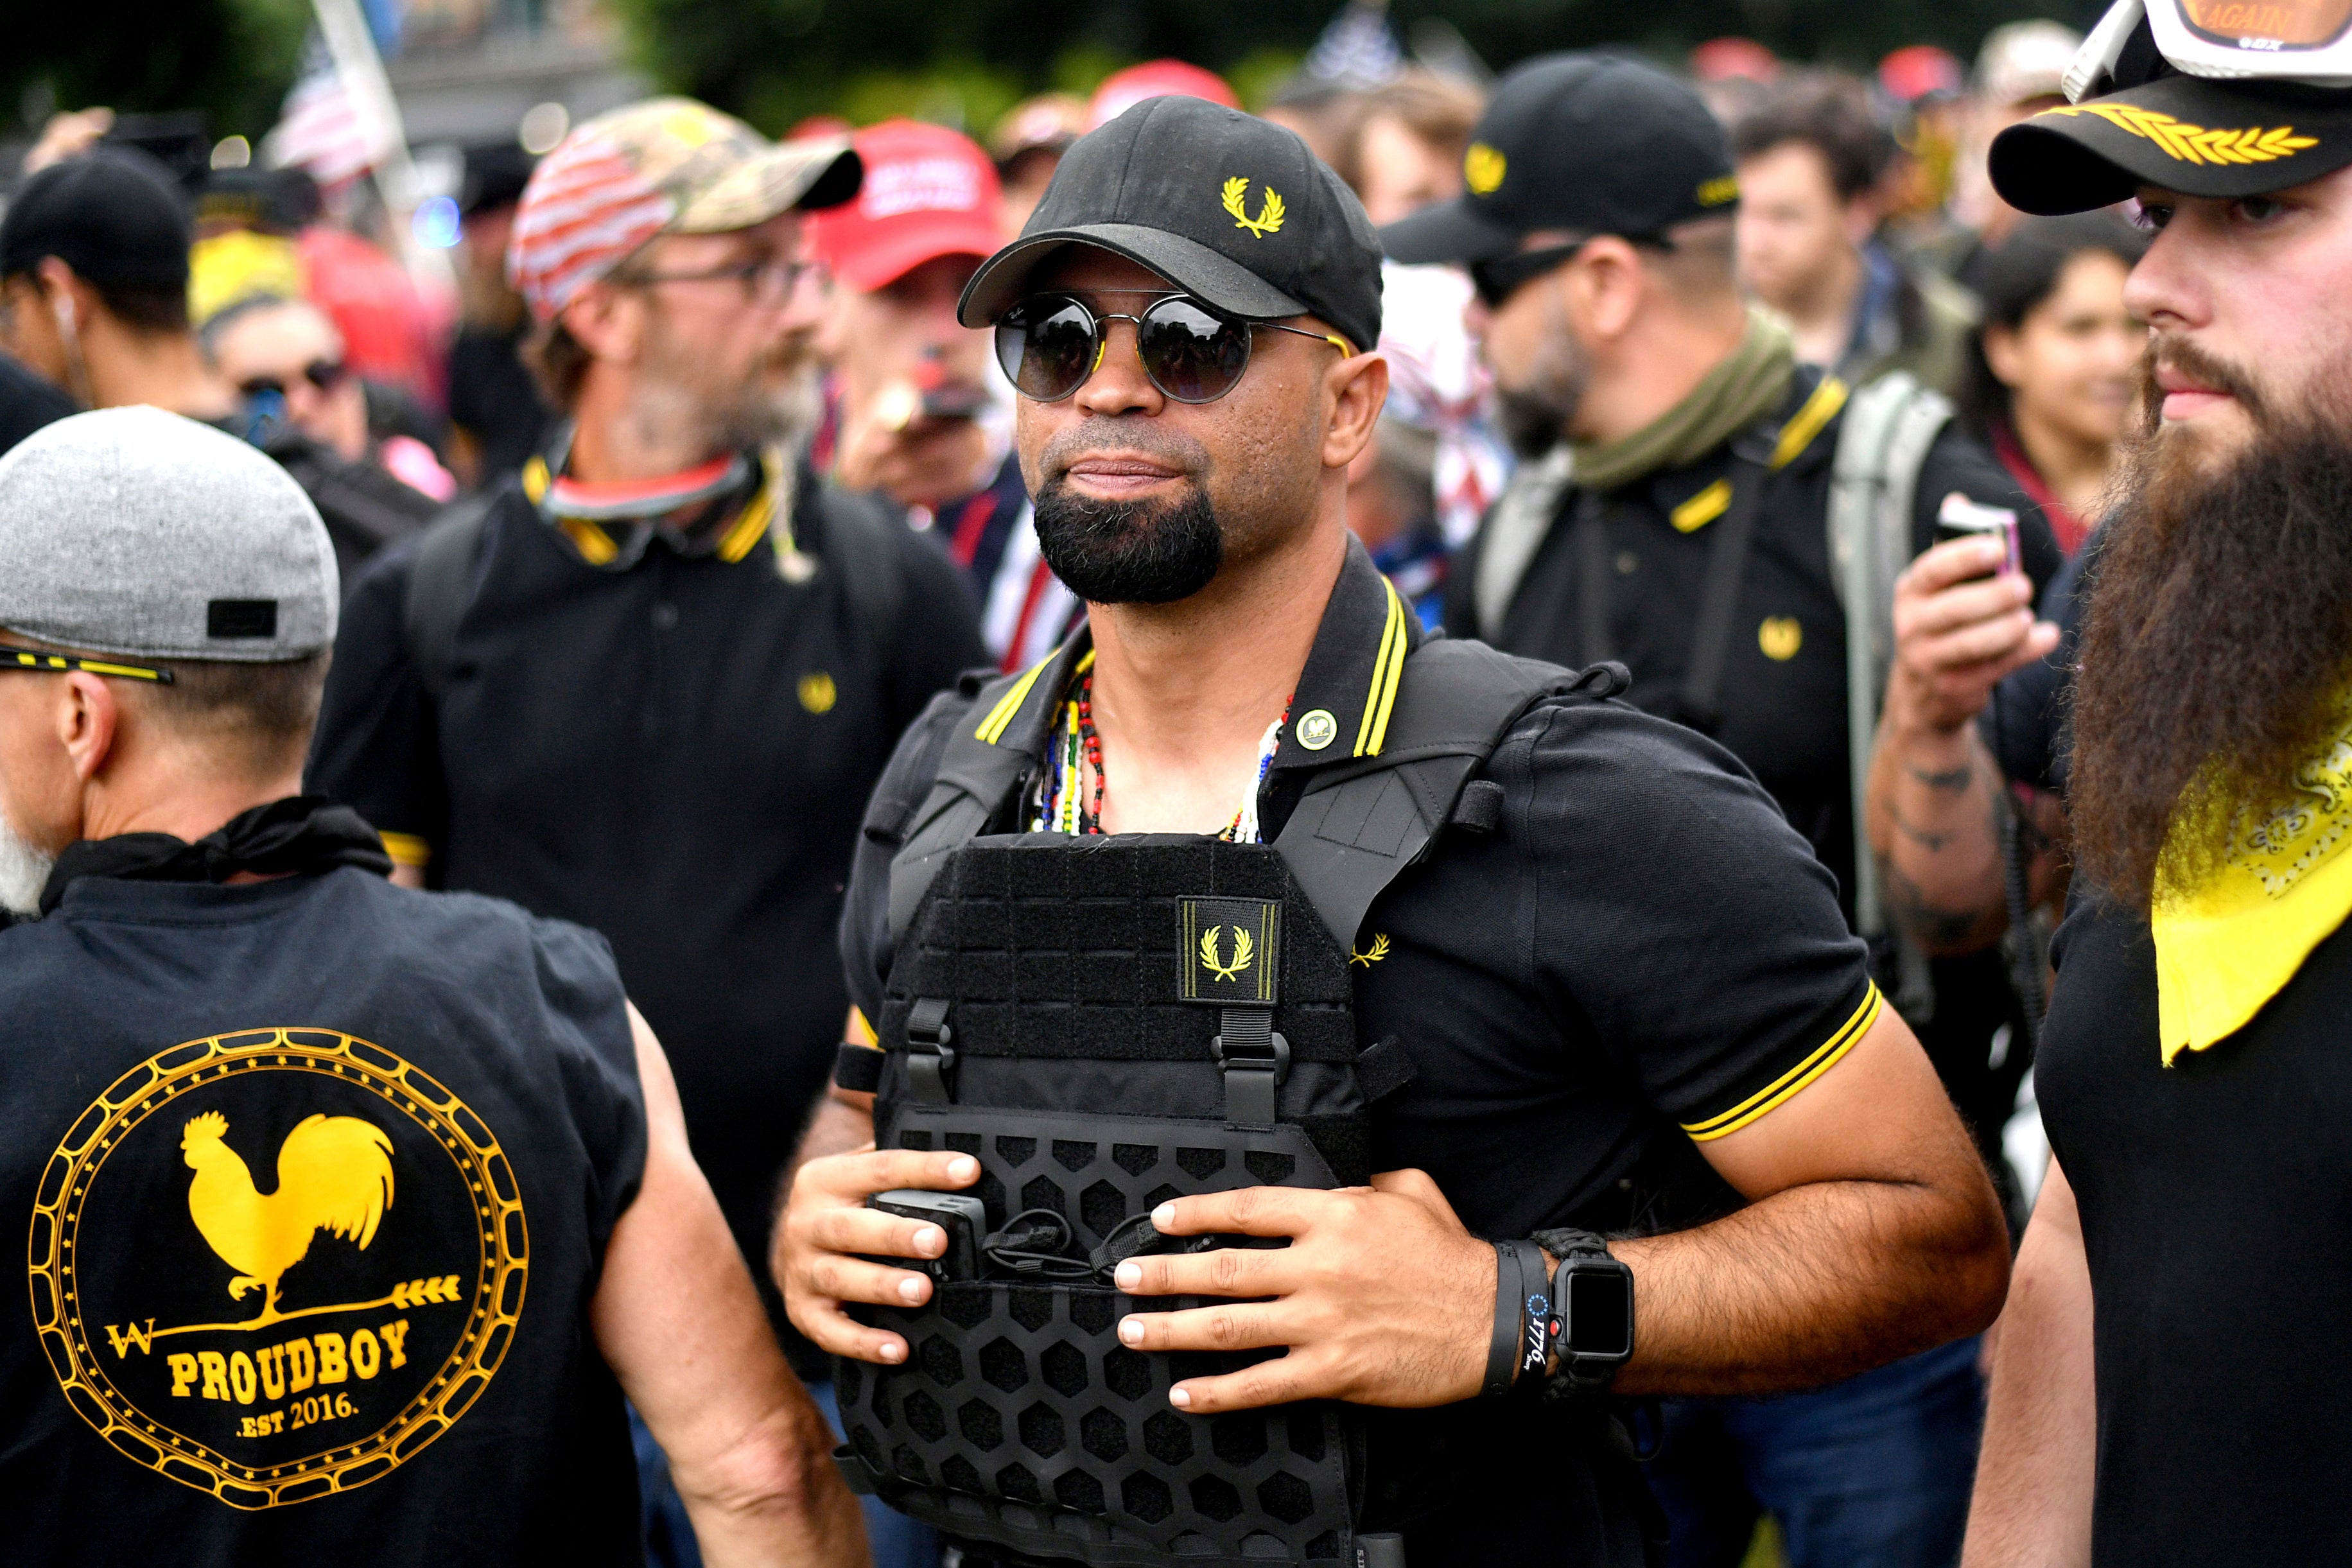 Proud Boys leader Enrique Tarrio was among four ordered to pay $1million to a church after the group destroyed its Black Lives Matter sign in 2020